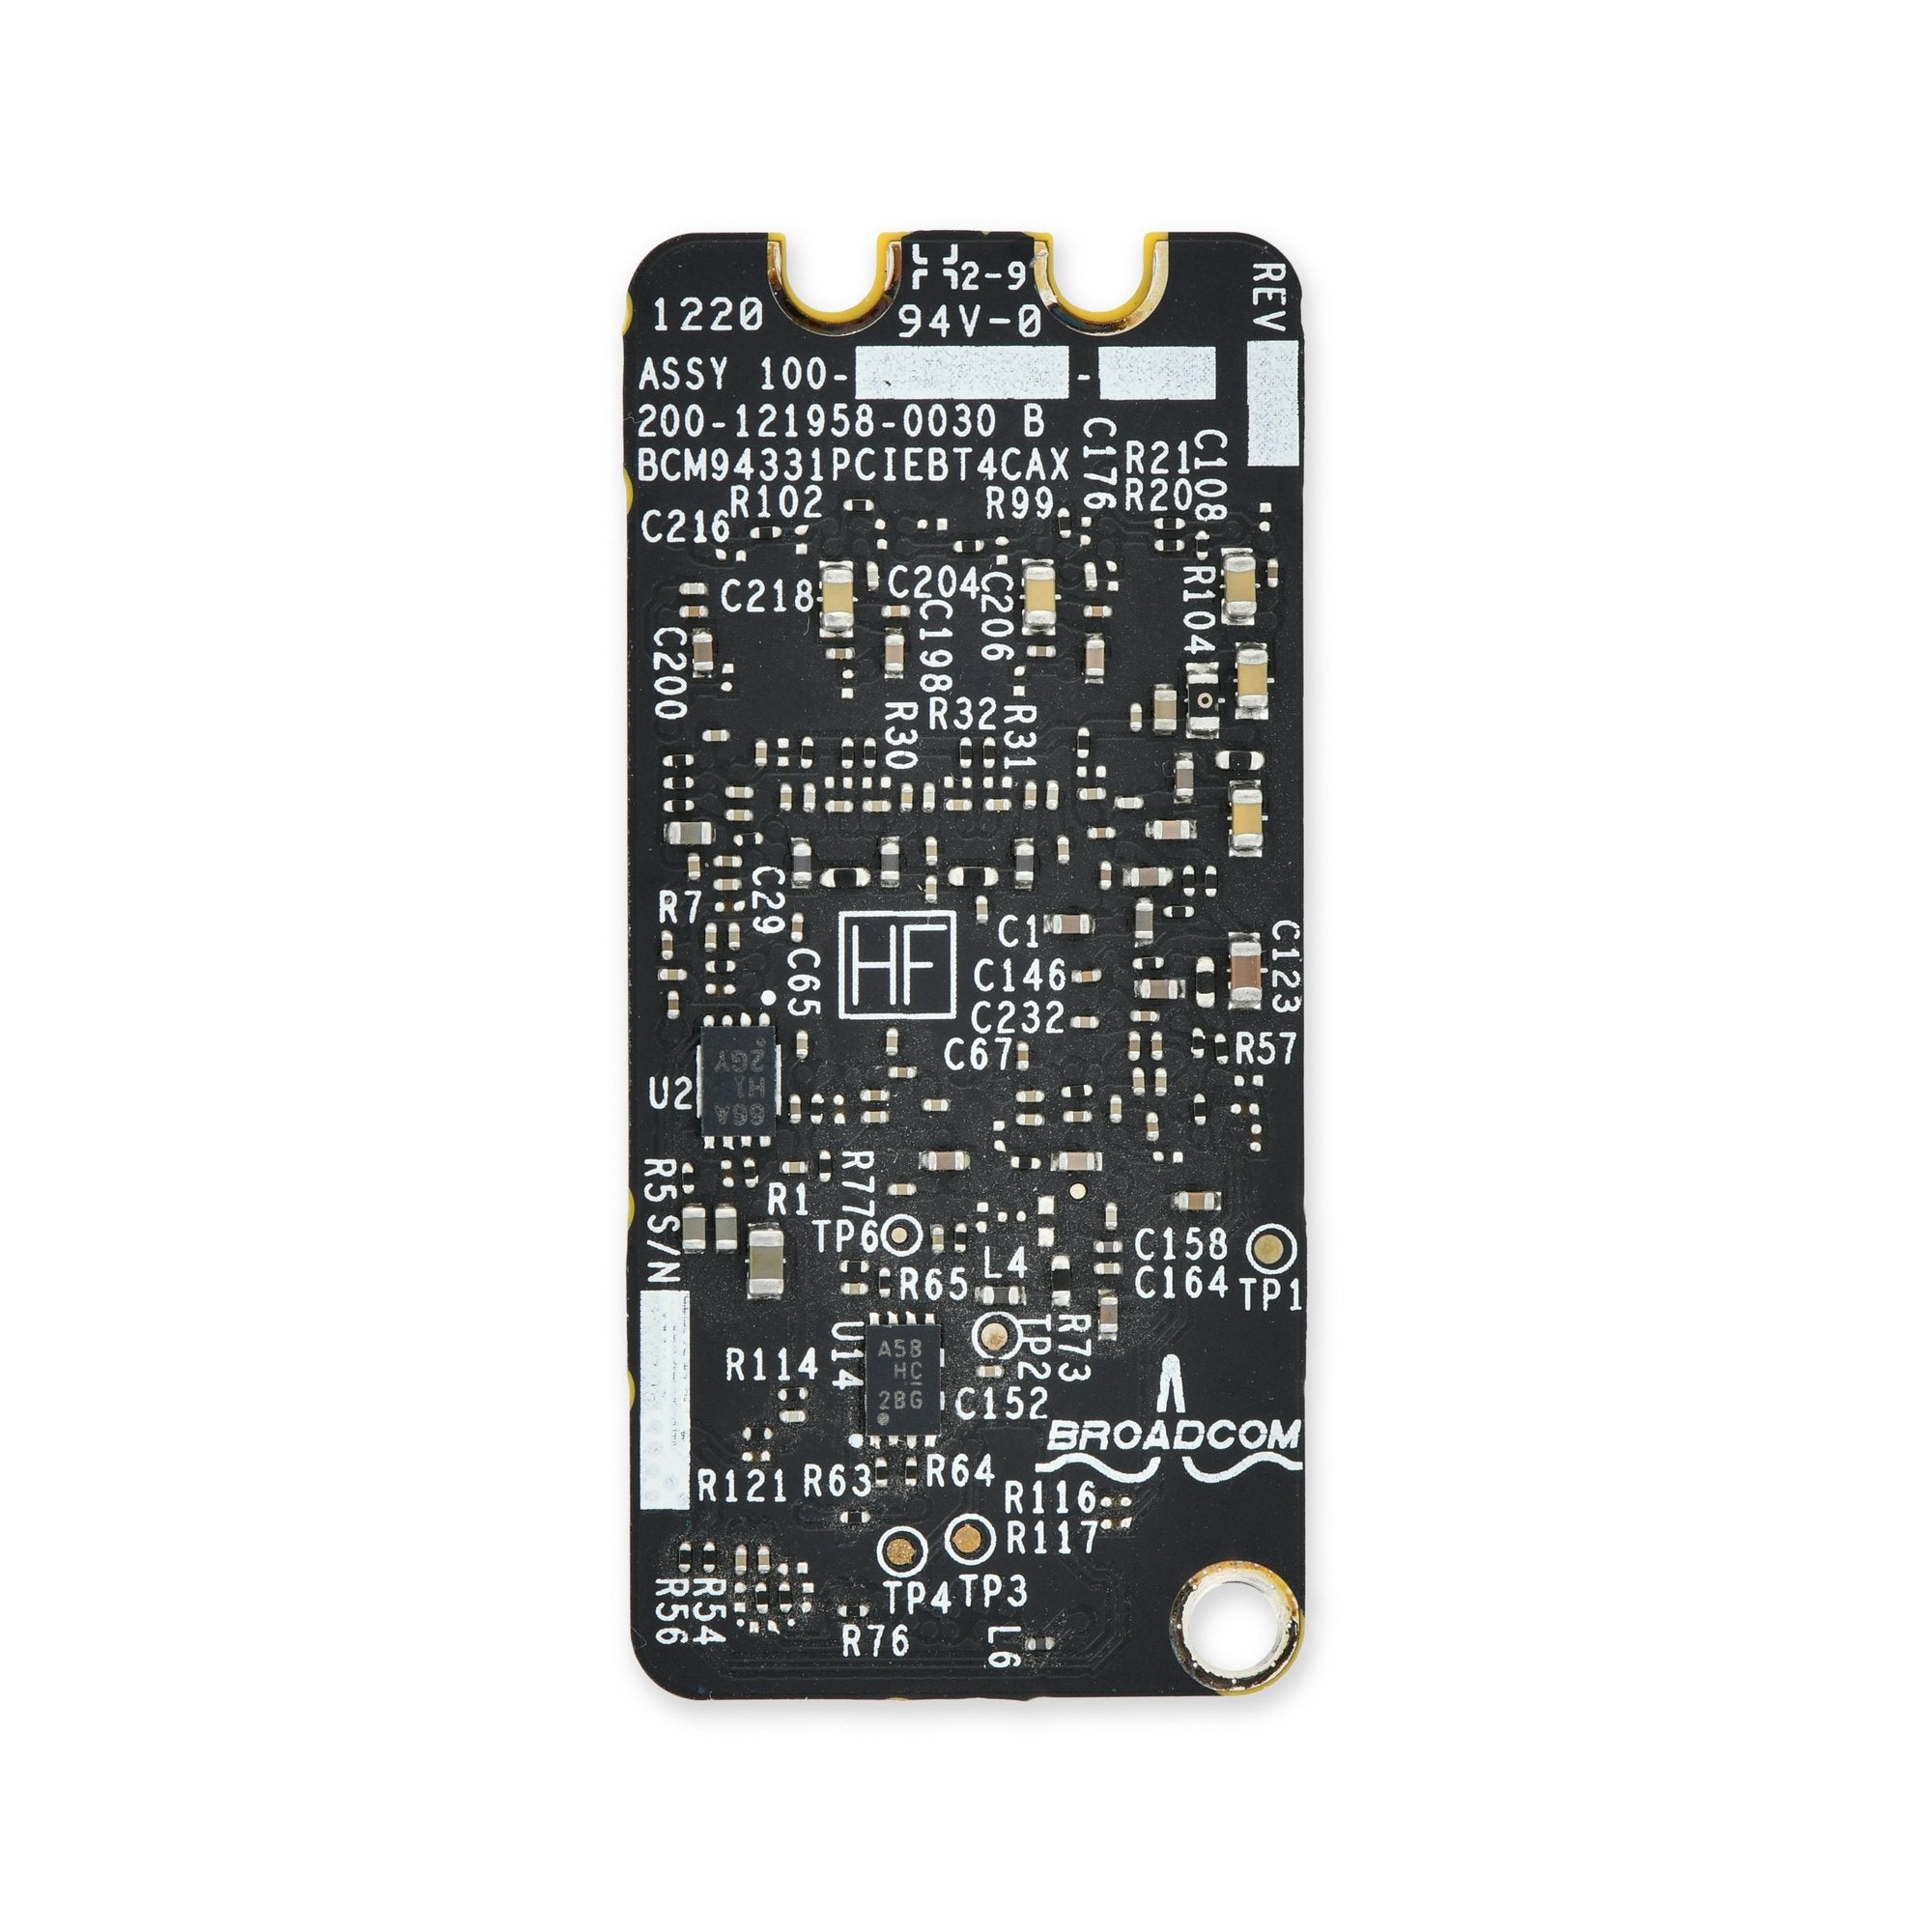 MacBook Pro Unibody (Early 2011-Mid 2012) AirPort/Bluetooth Board Used Bluetooth 4.0